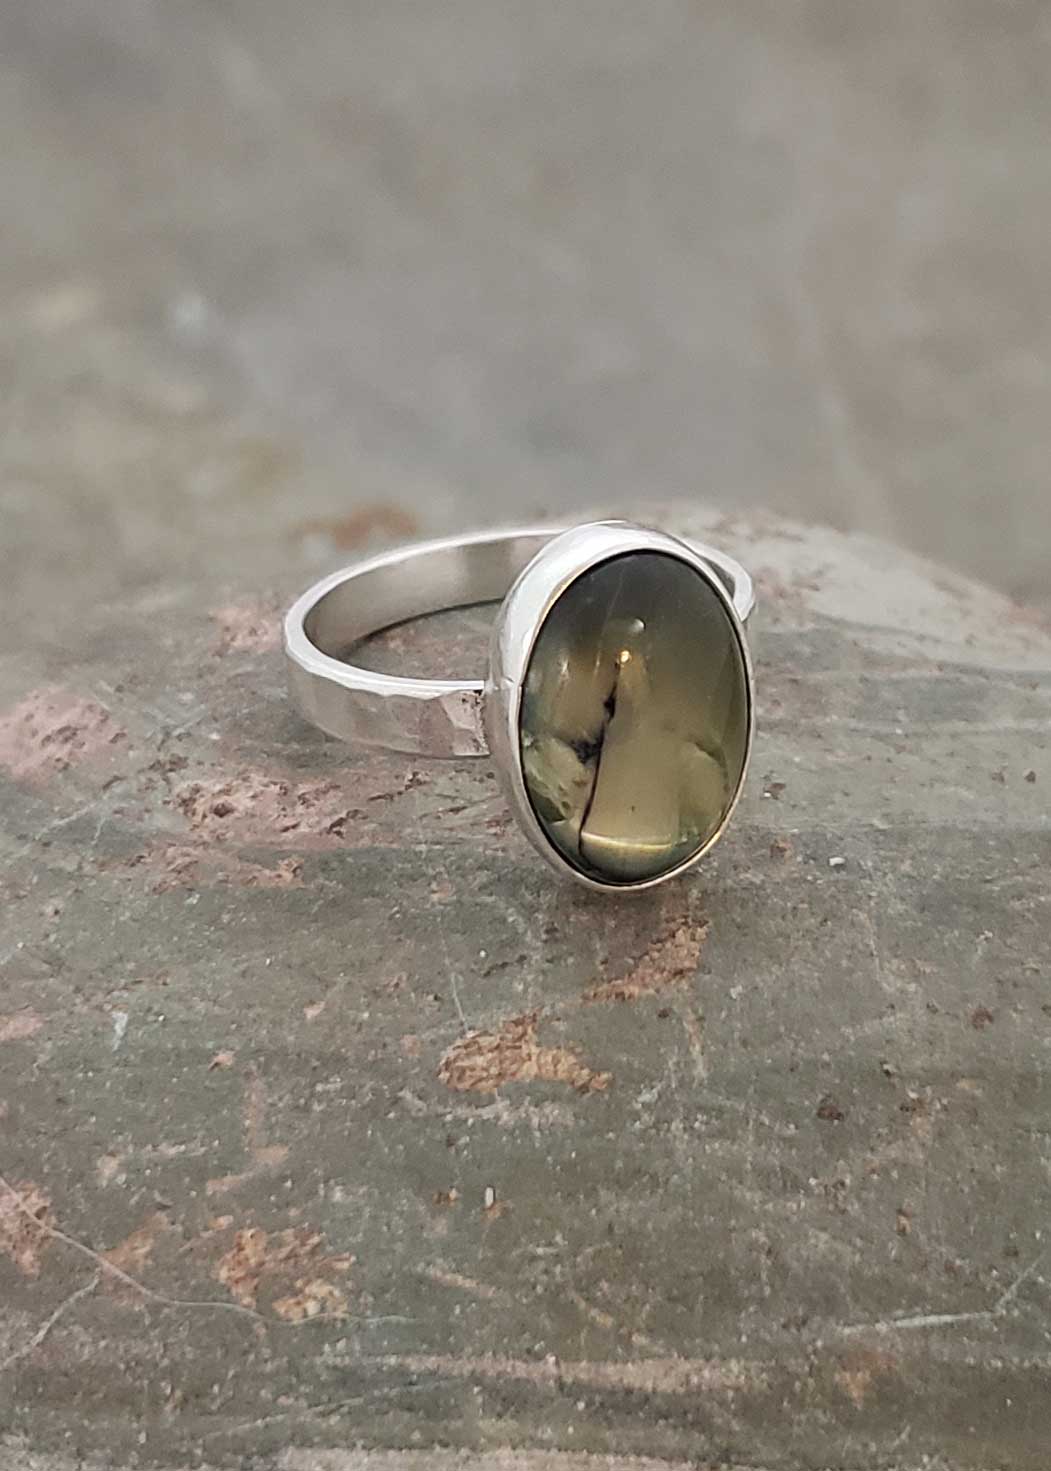 glow of olive green is captured in this silver ring, by Dona Miller